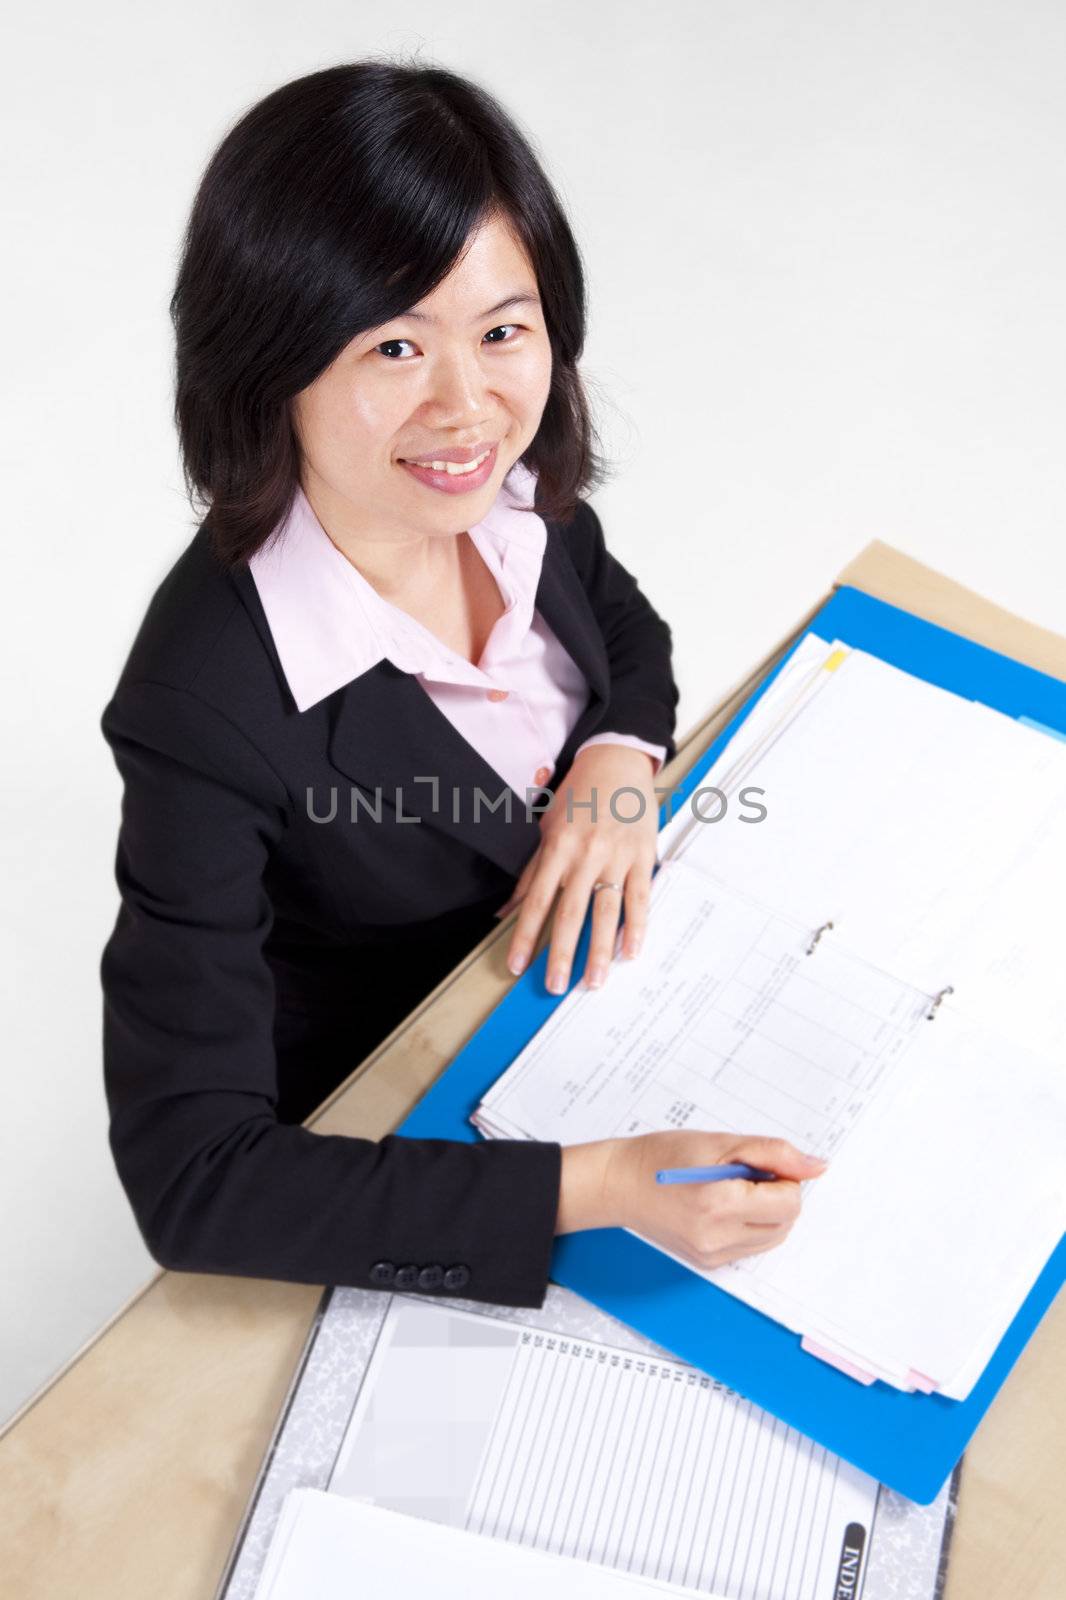 A businesswoman sitting at the table with document.